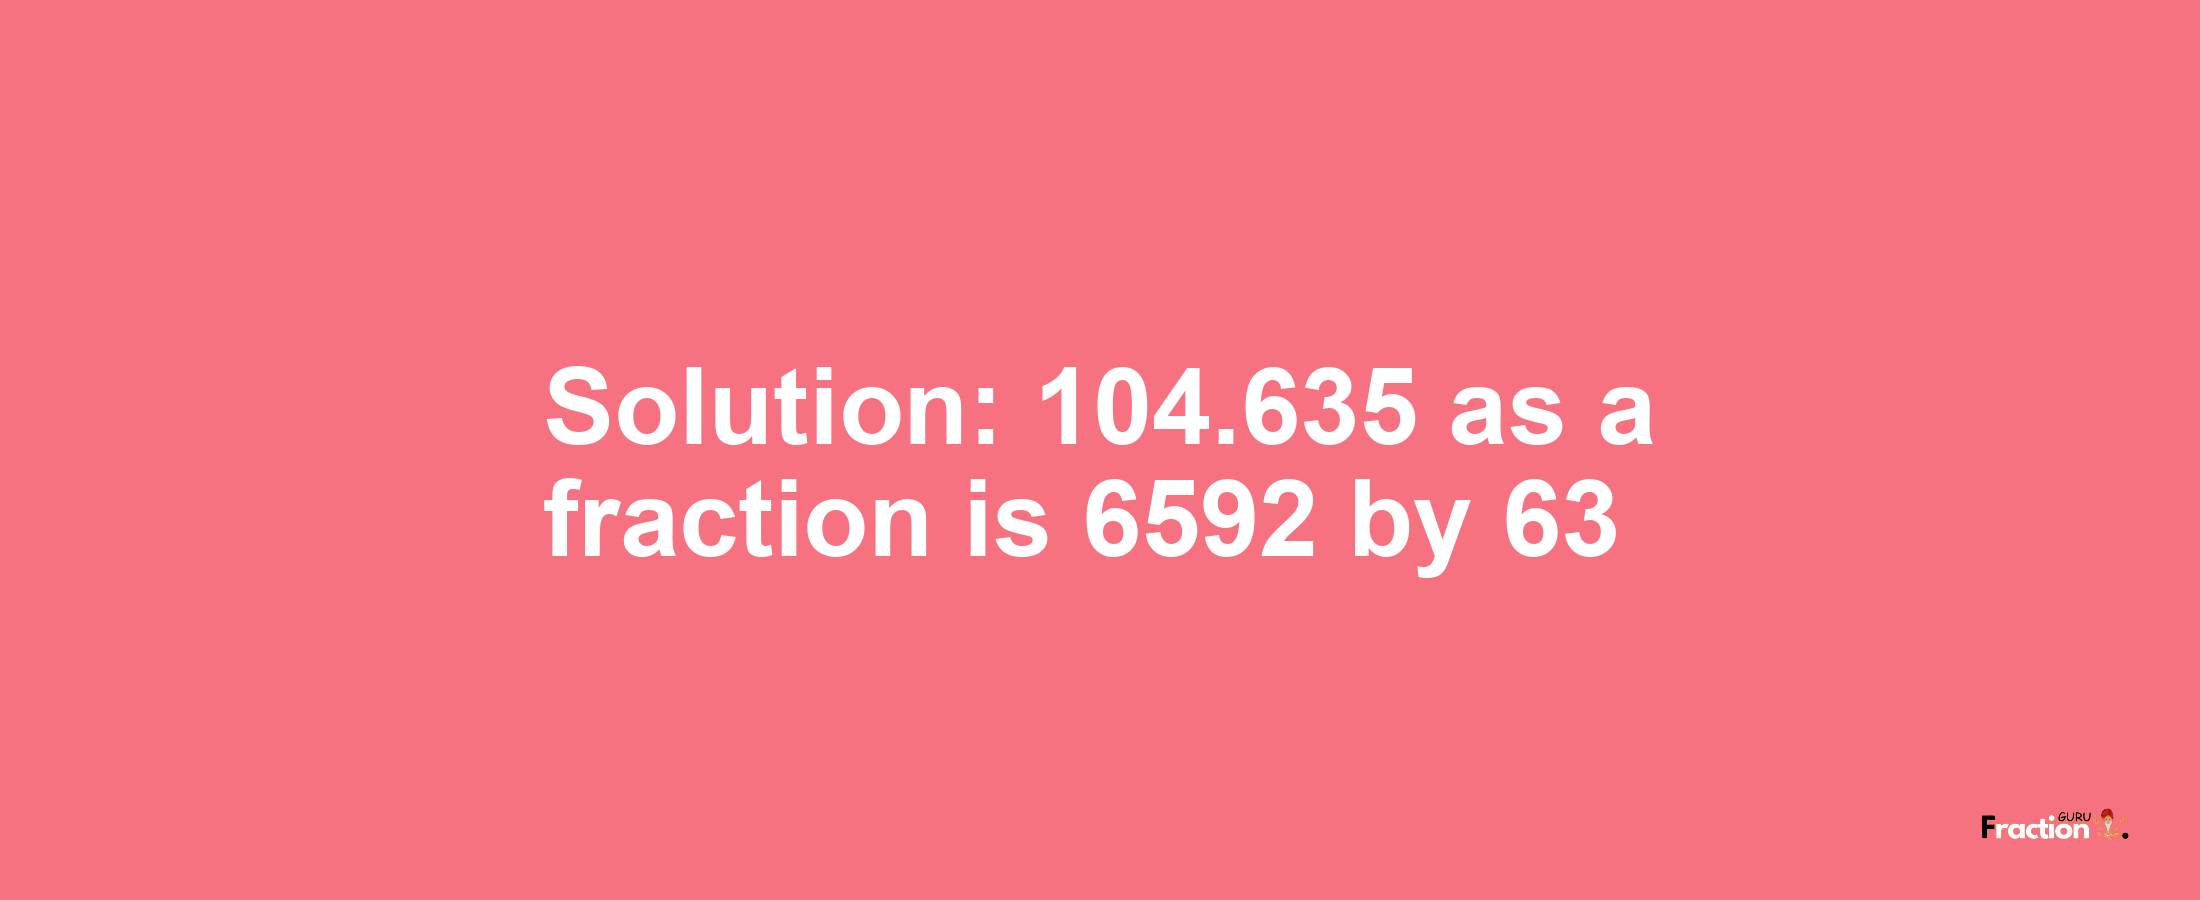 Solution:104.635 as a fraction is 6592/63